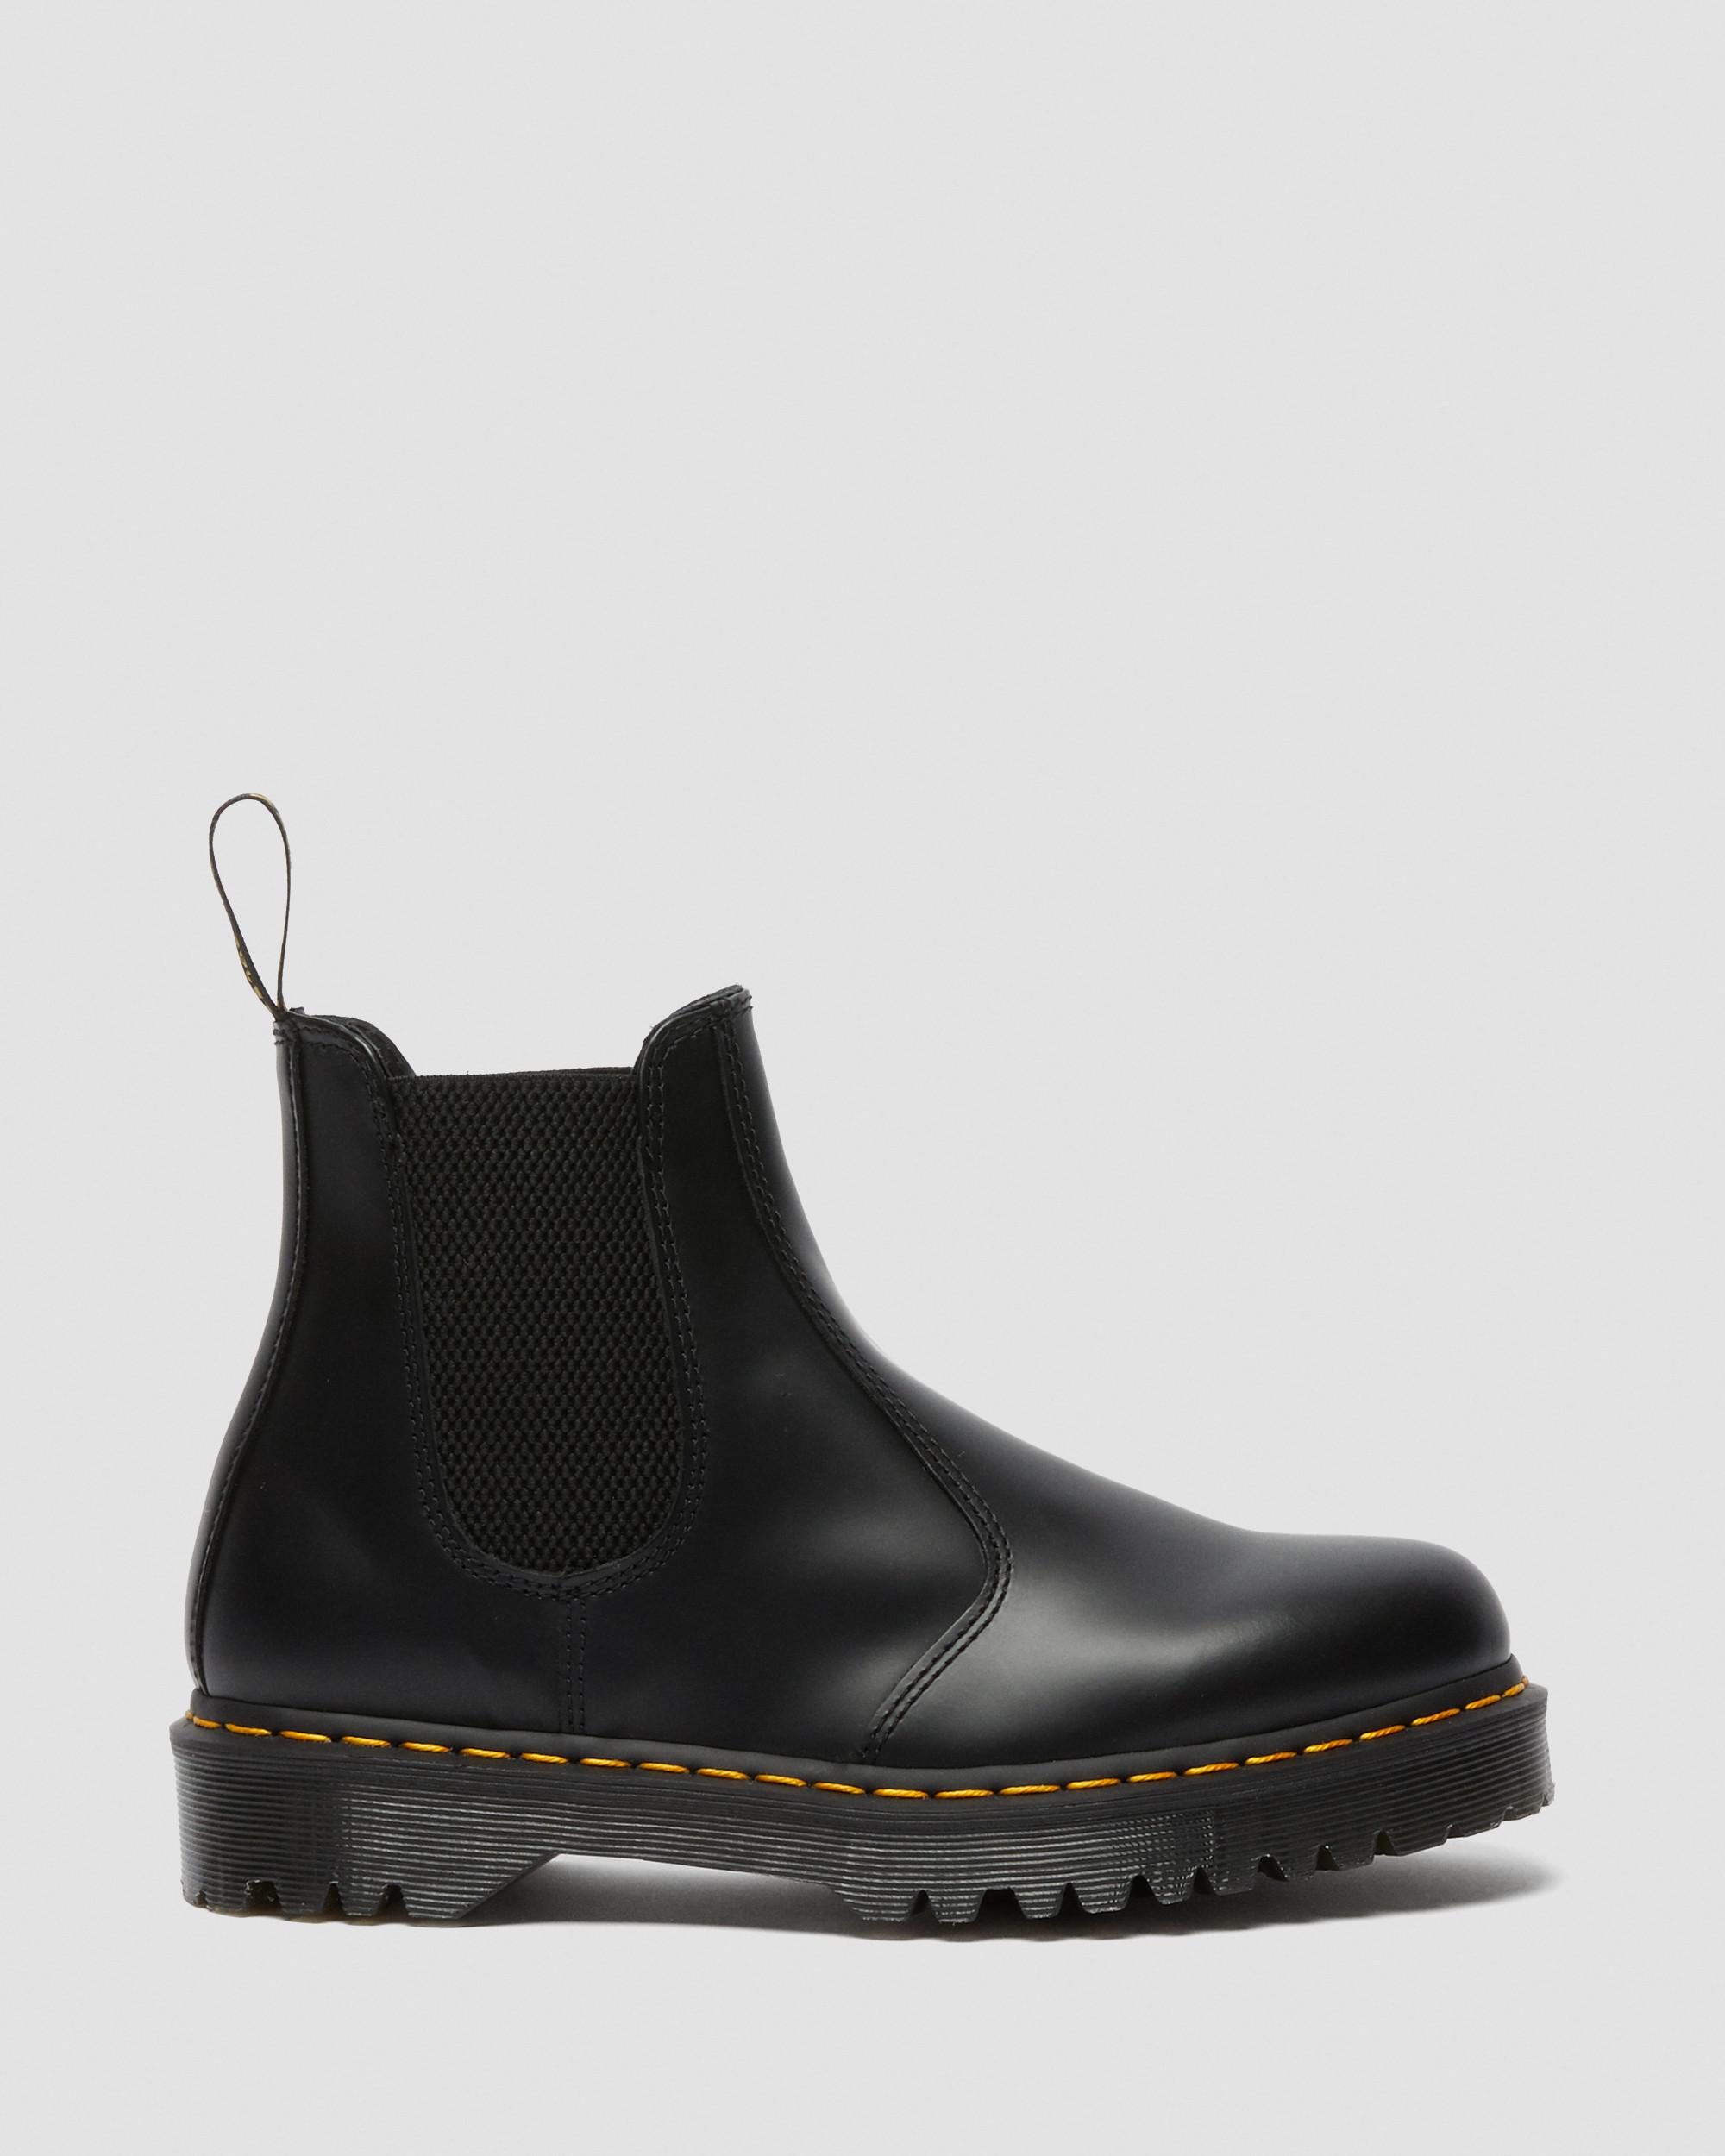 2976 Bex Smooth Leather Chelsea Boots in Black | Dr. Martens